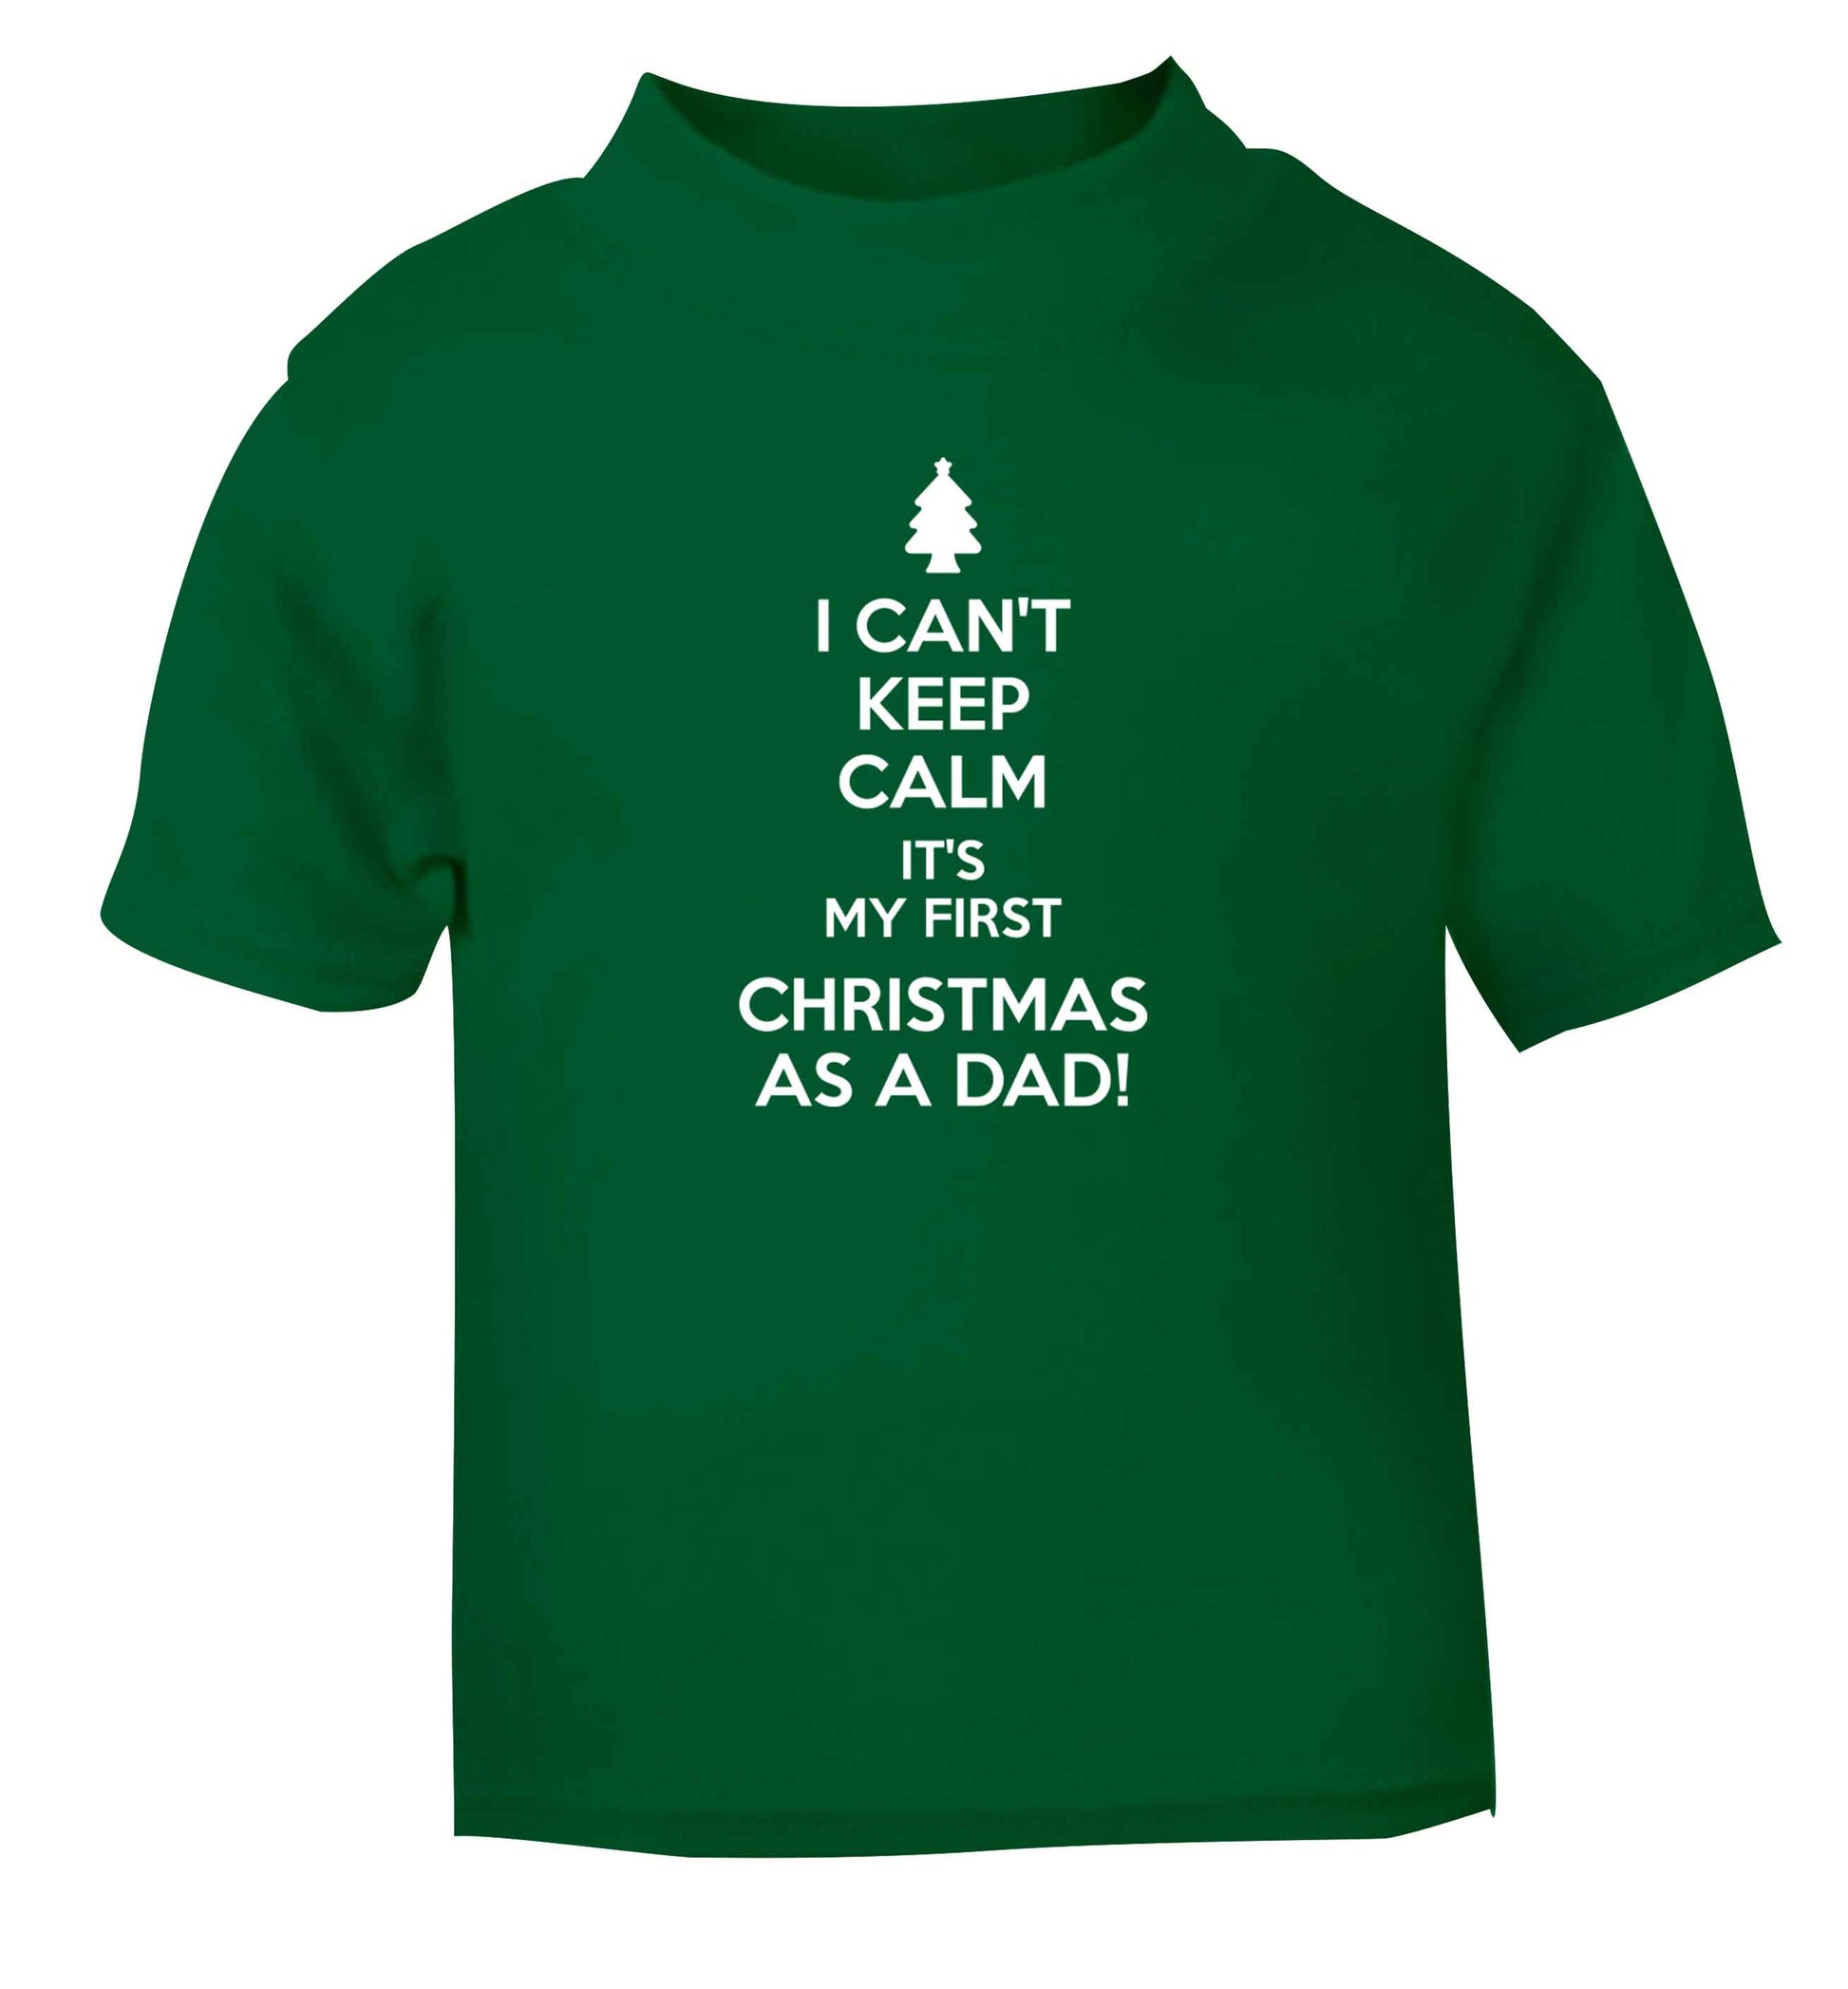 I can't keep calm it's my first Christmas as a dad green Baby Toddler Tshirt 2 Years